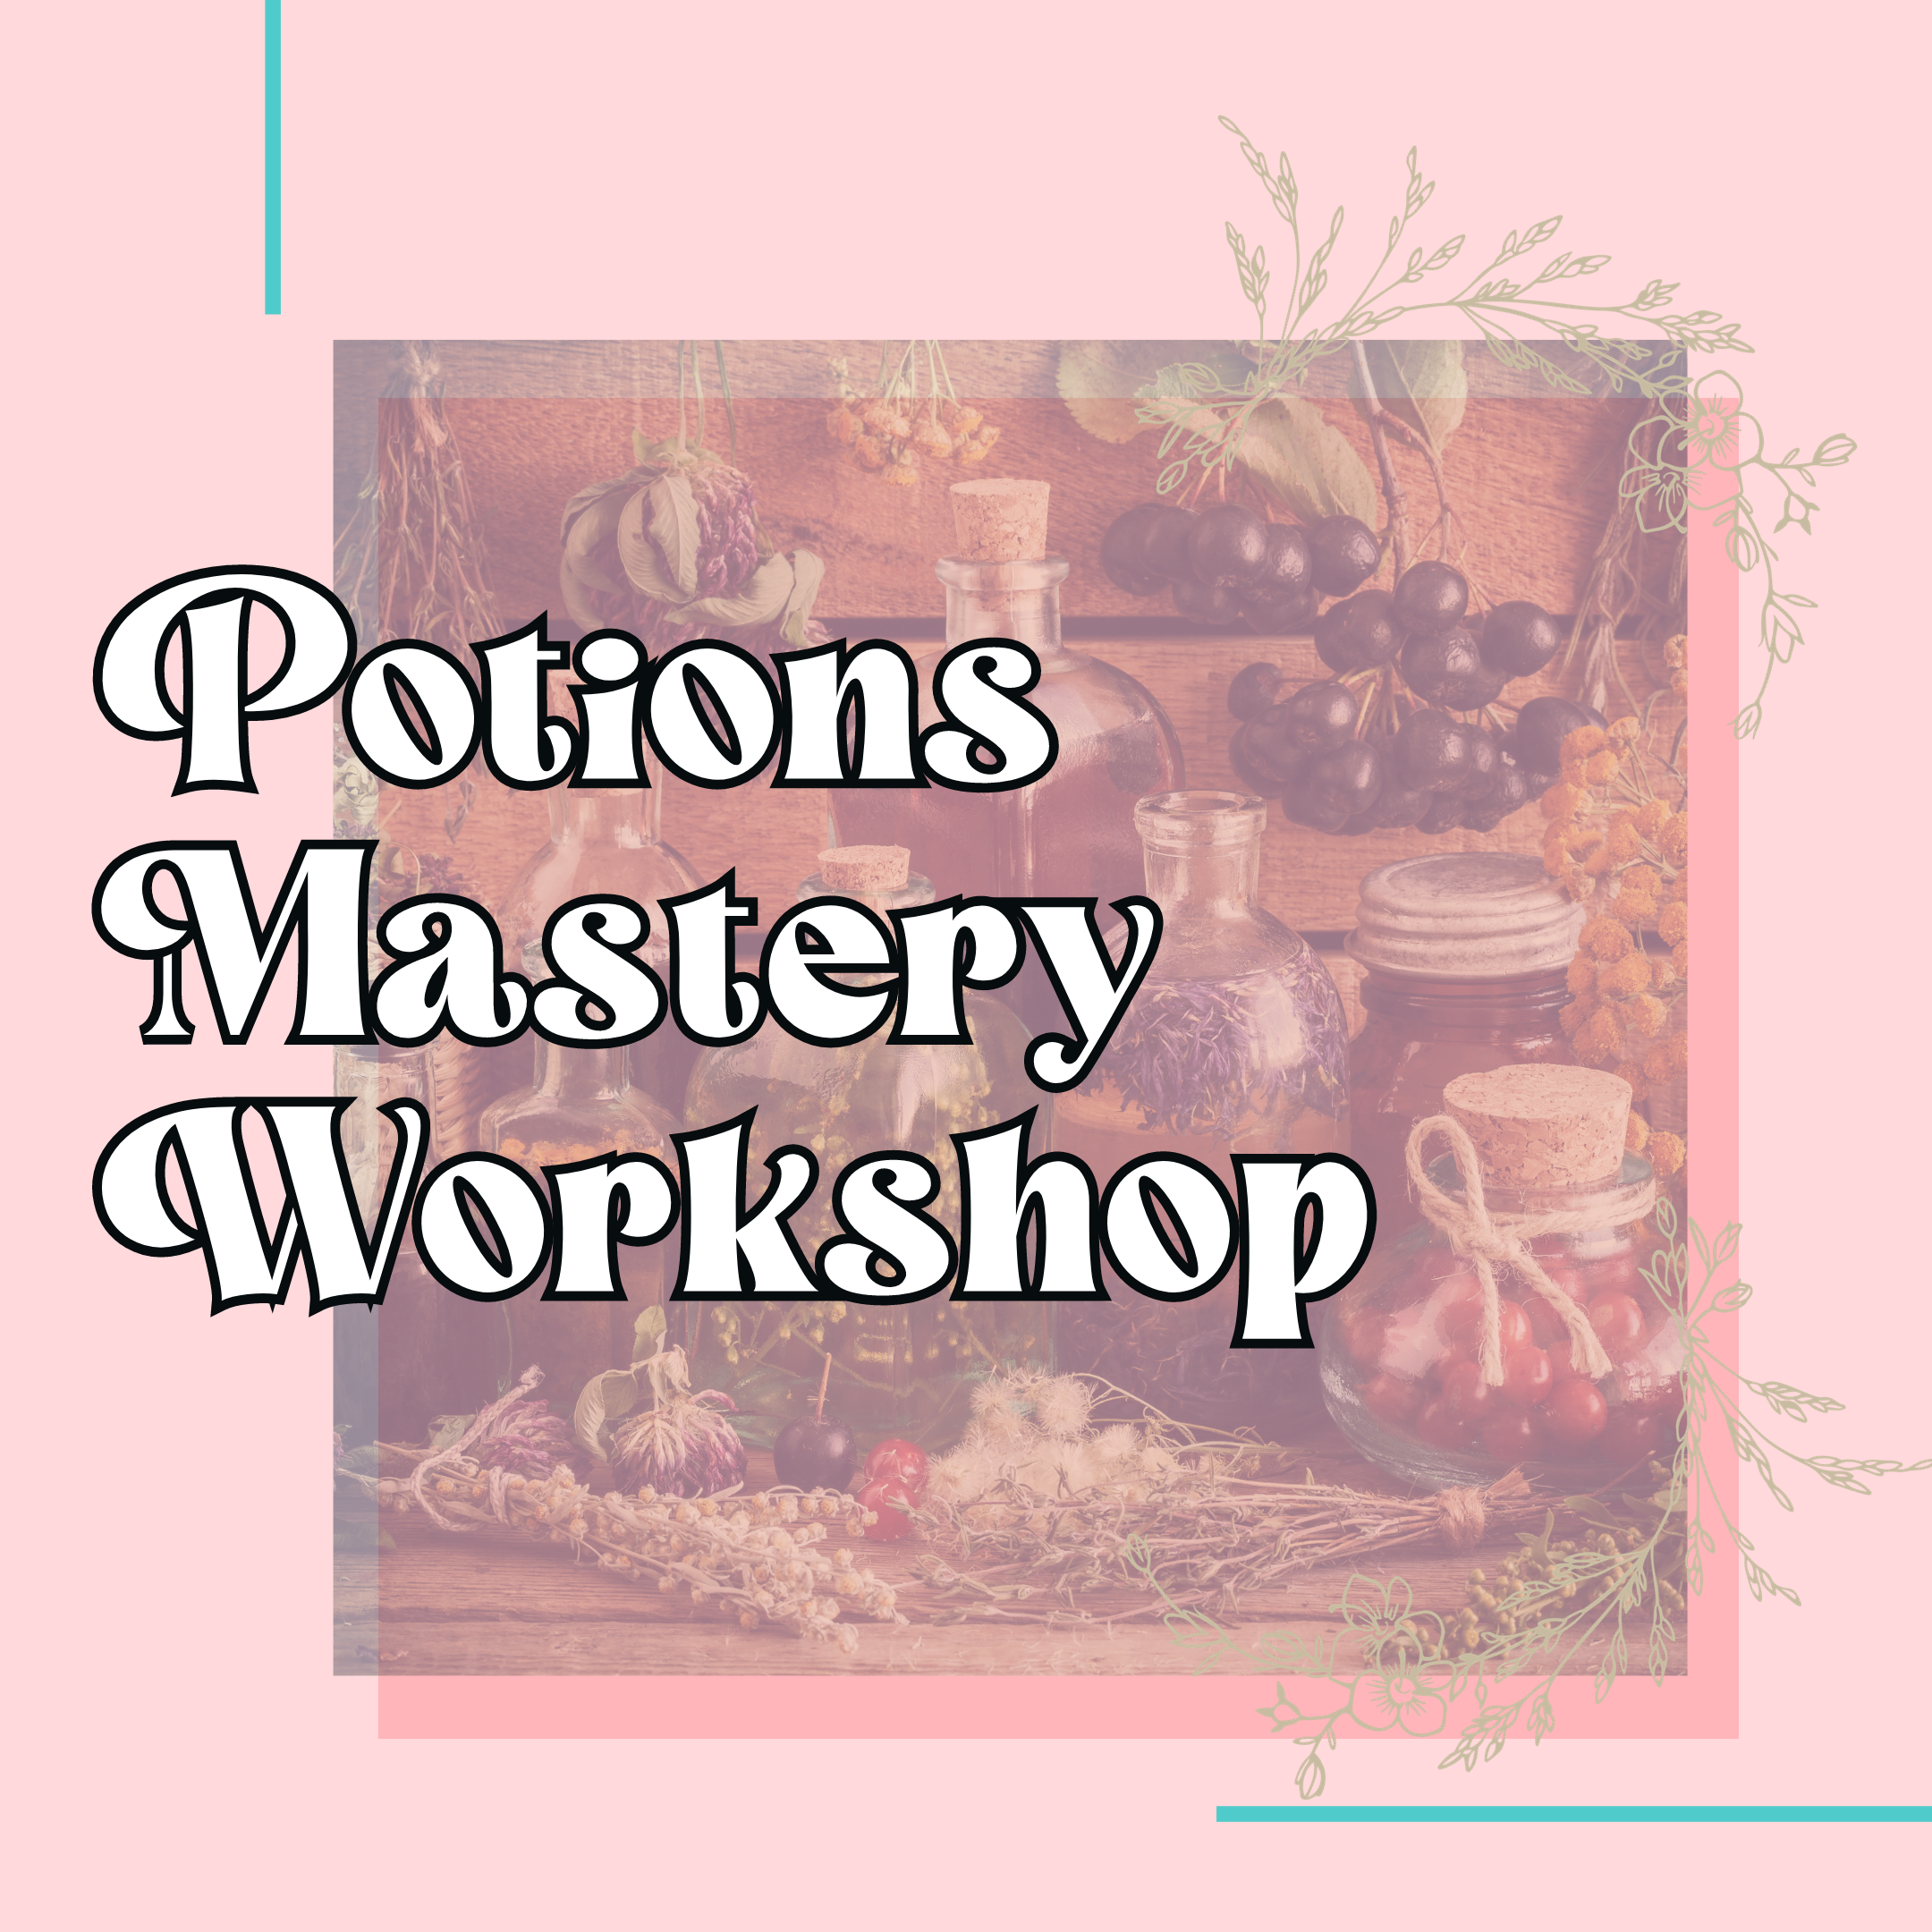 Mystical Potions Mastery Workshop